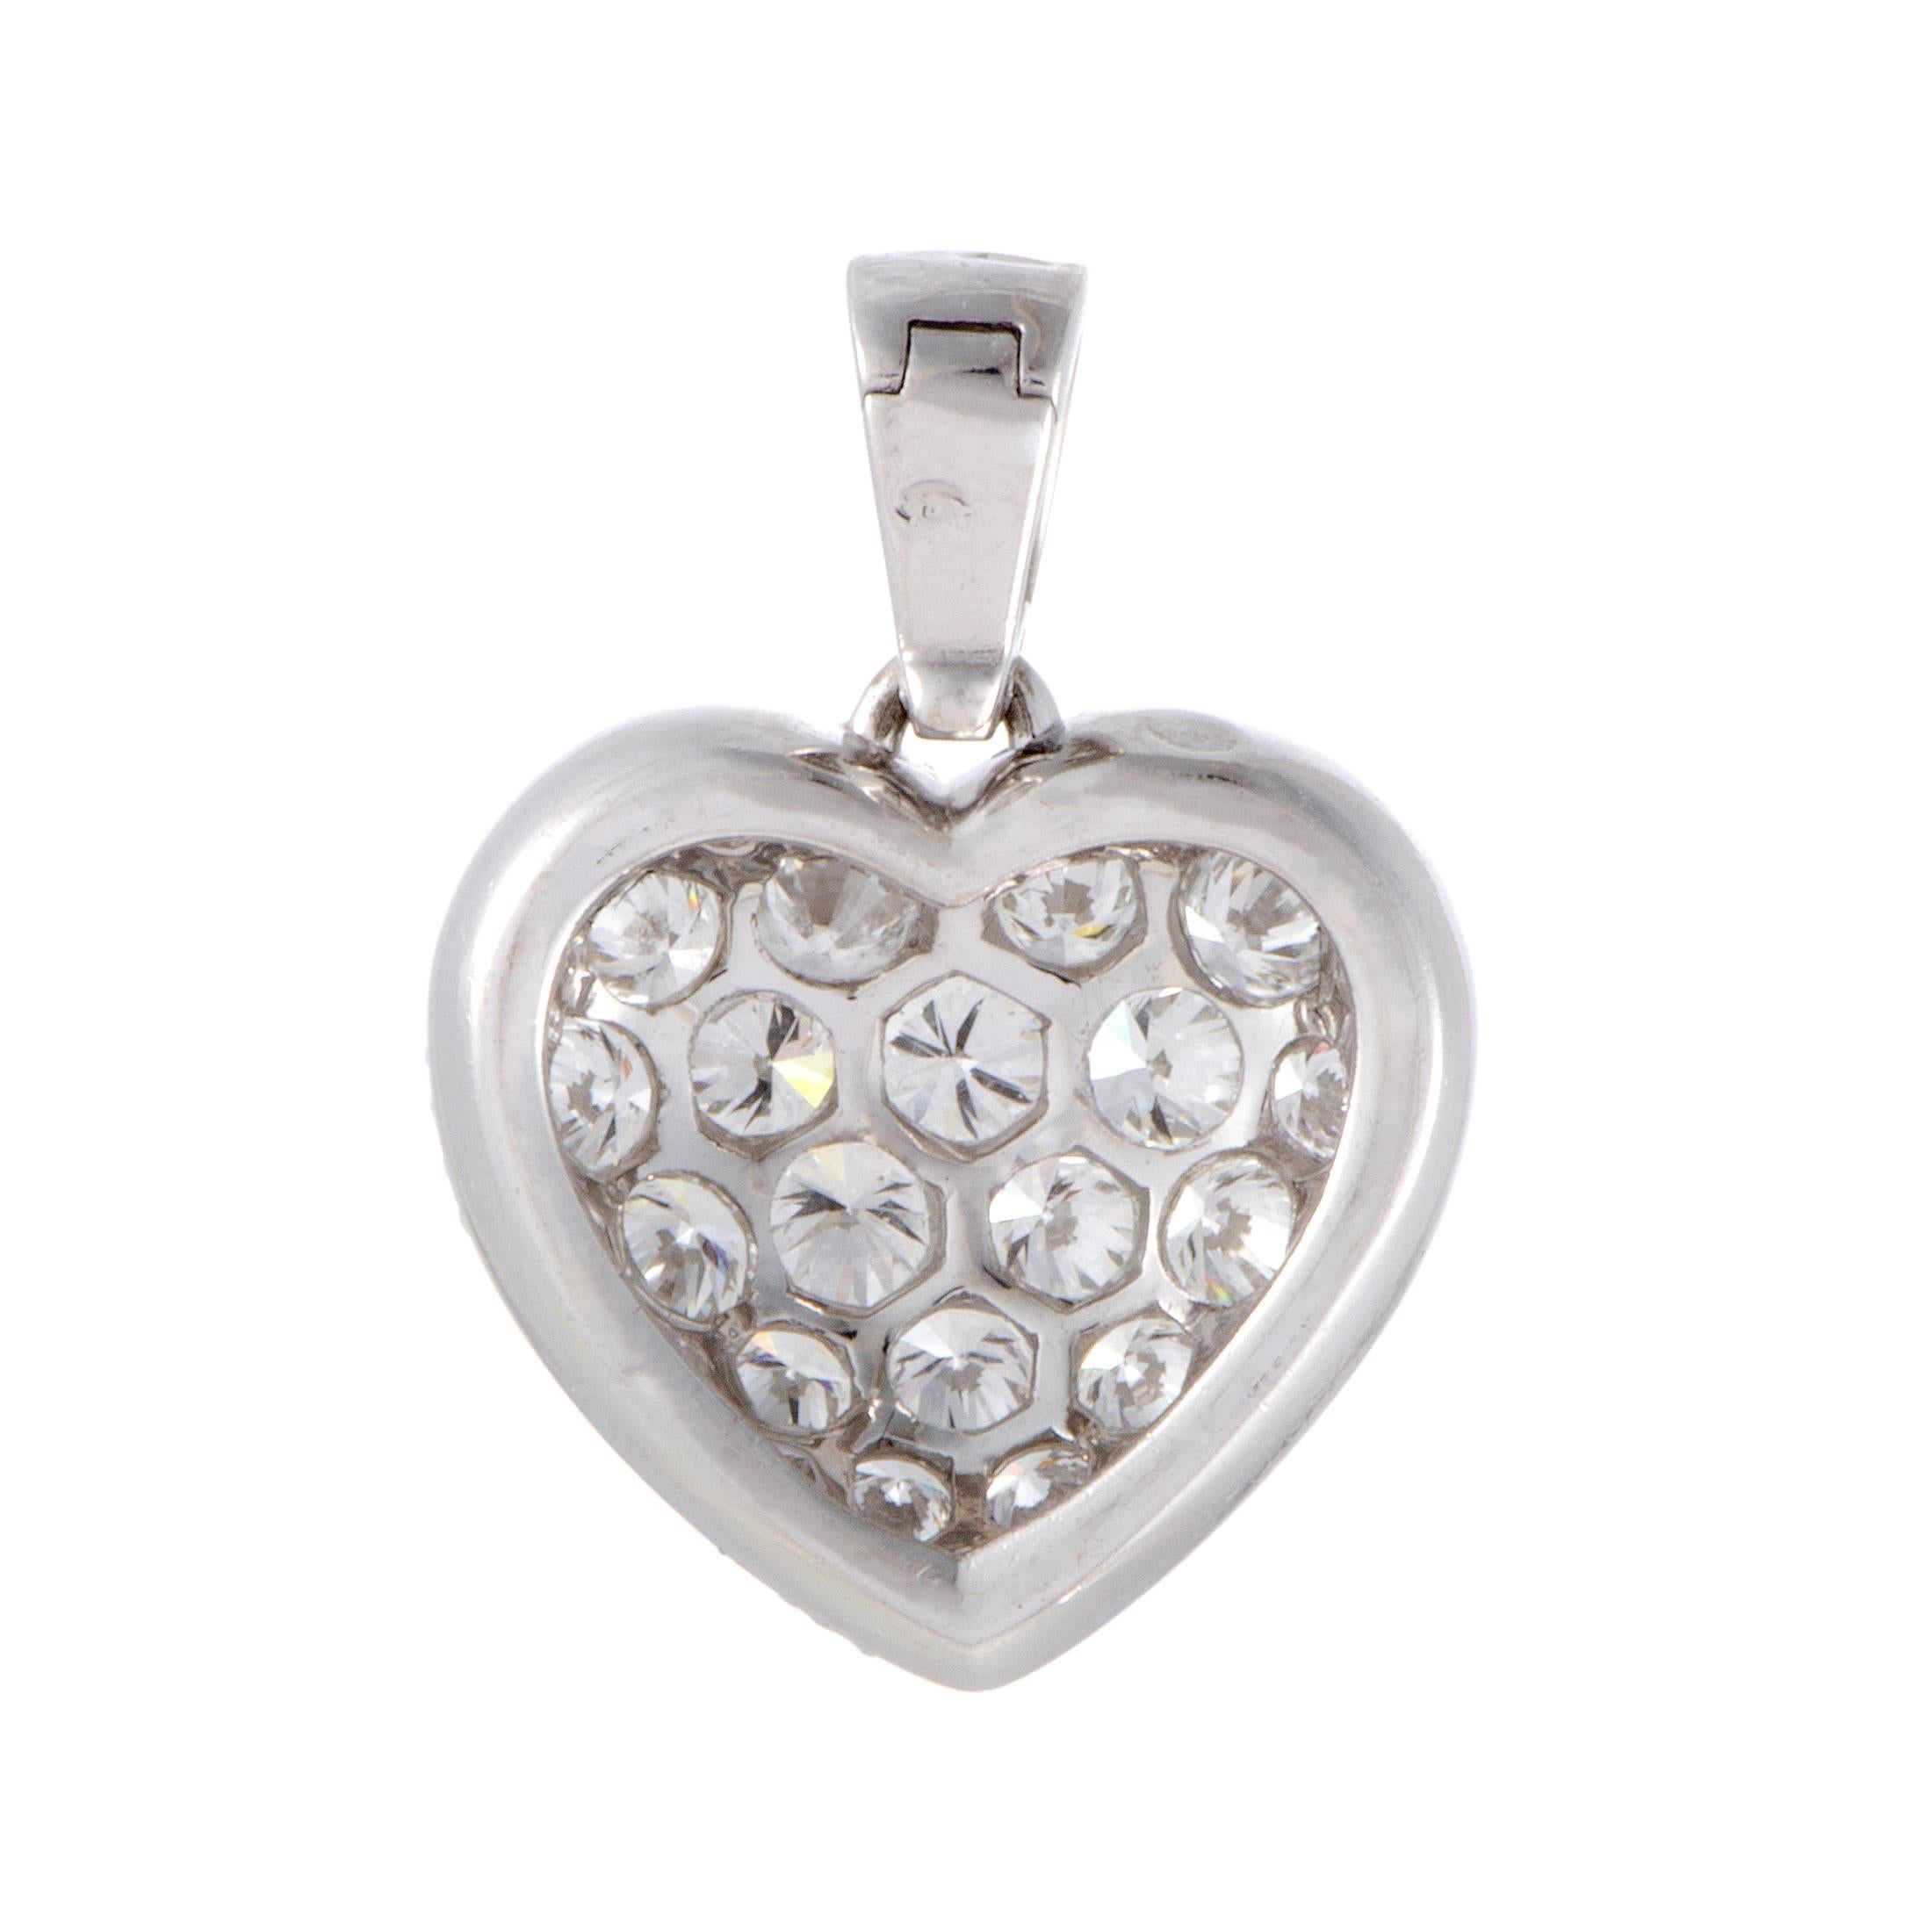 Charm and beauty are embodied in this gorgeous pendant by Cartier. It is glamorously designed in the shape of a heart in 18K white gold, completely paved with twinkling 1.25ct of F-color, VVS1 clarity diamonds that shine beautifully against the